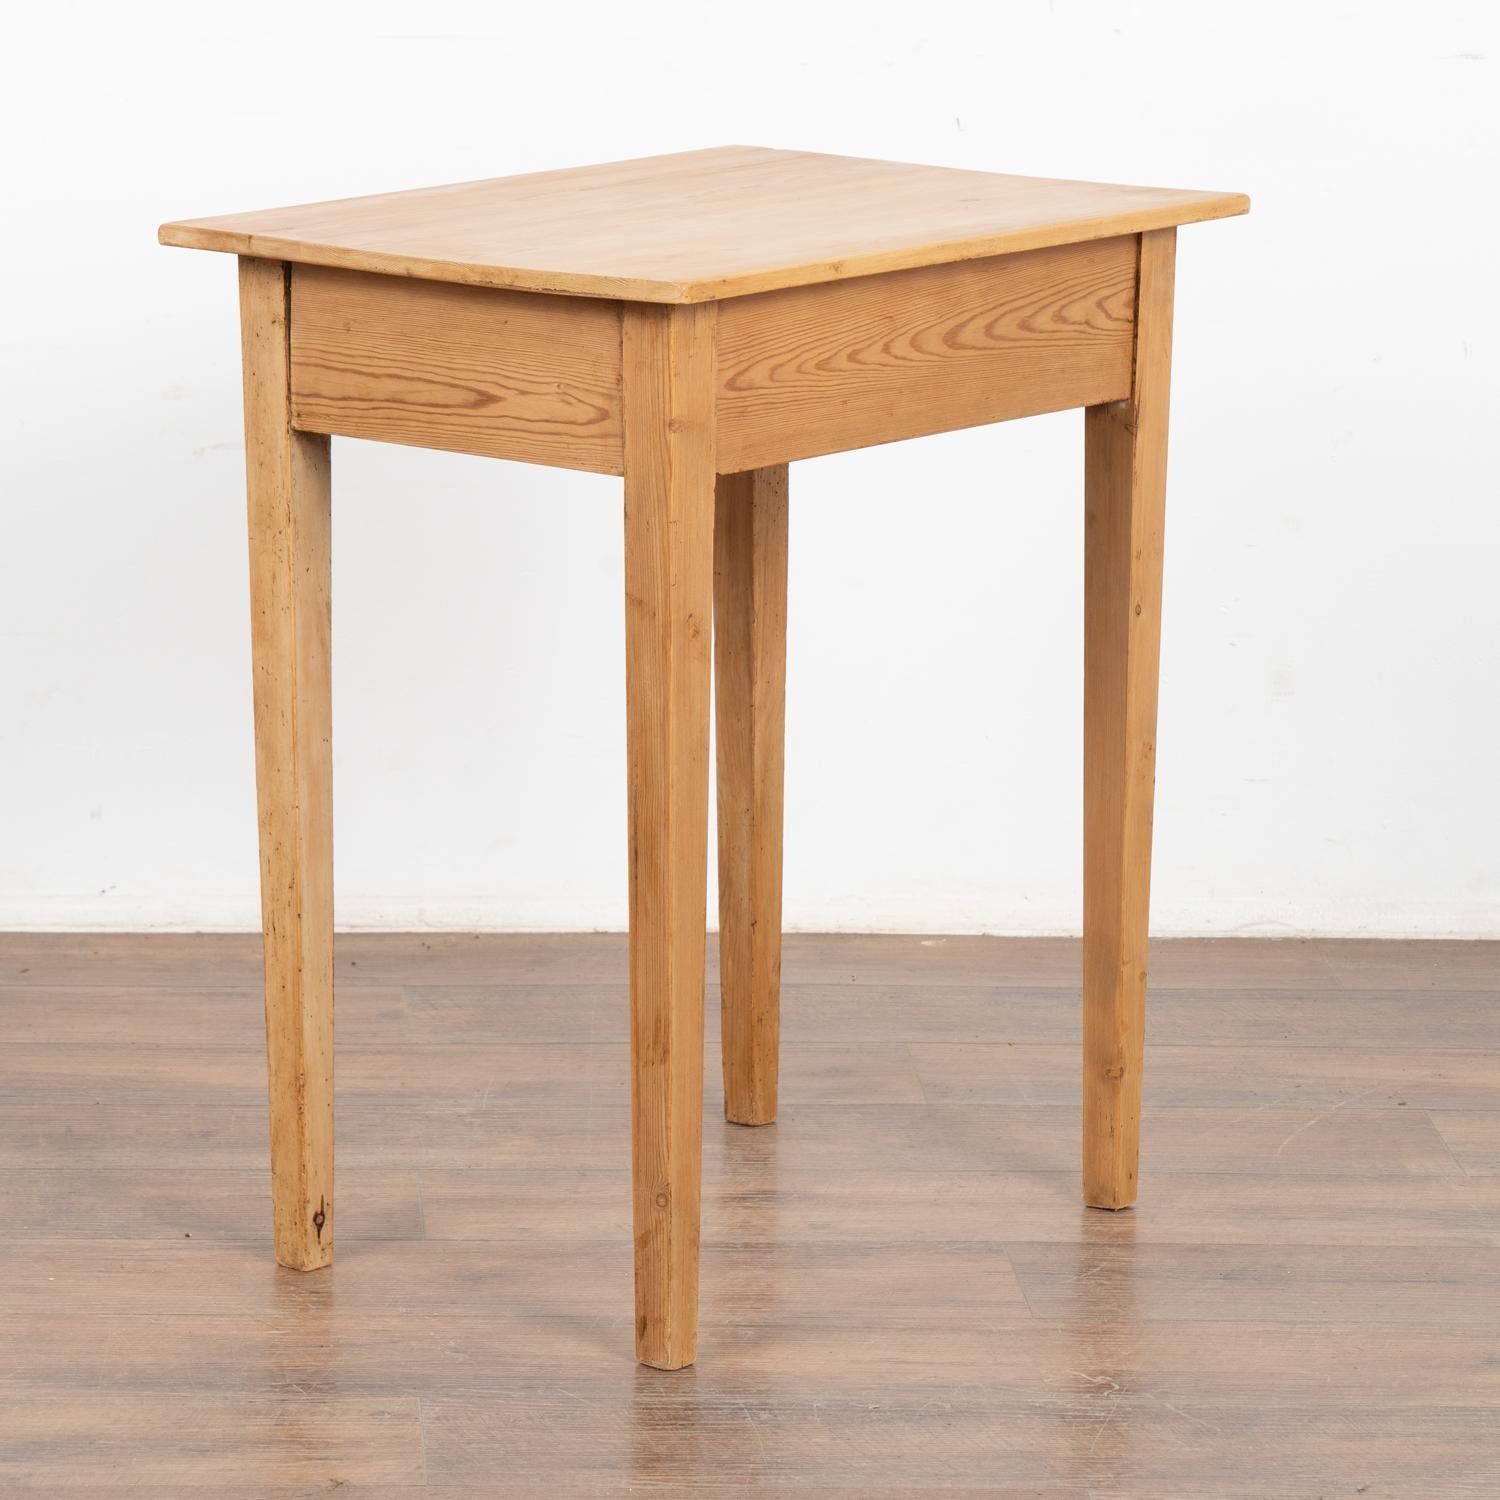 Small Pine Side Table With Tapered Legs, Denmark circa 1900's For Sale 3